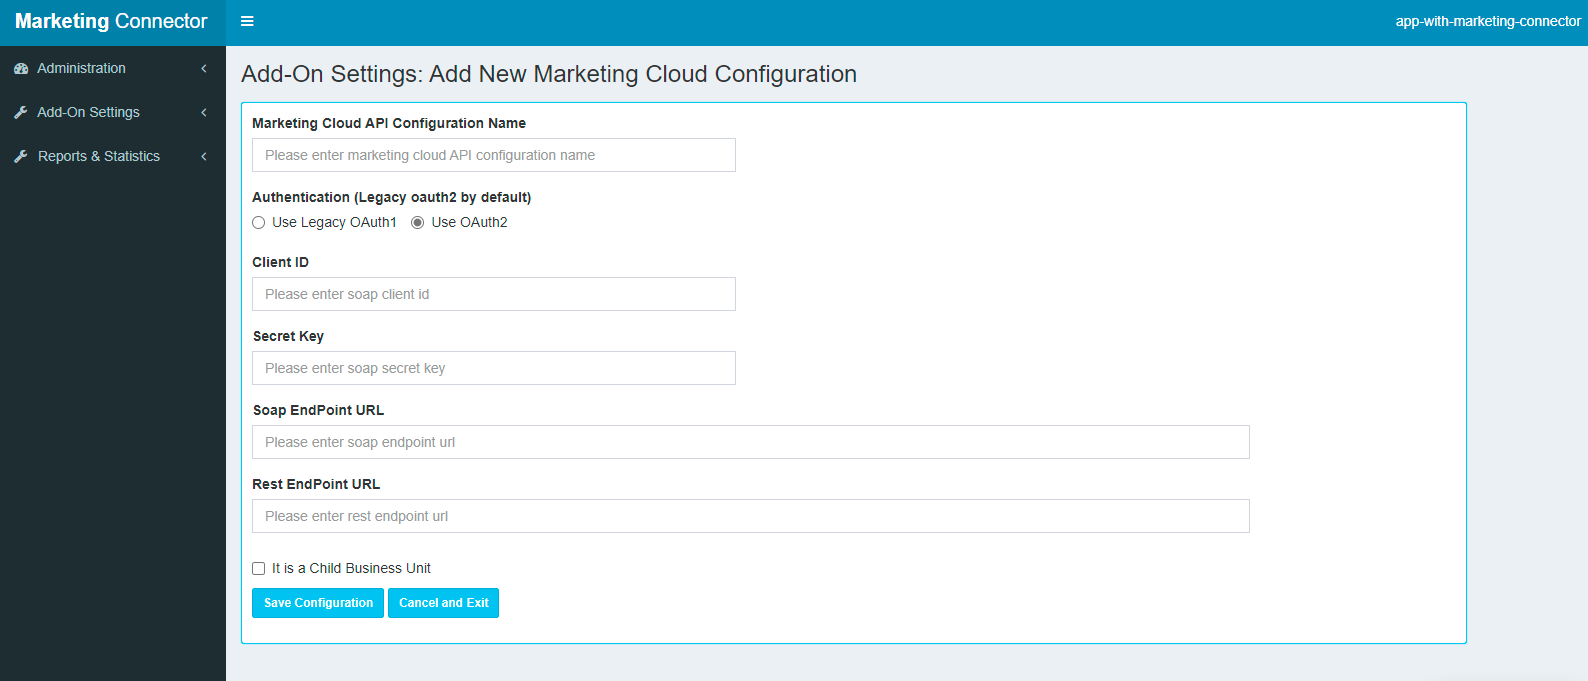 A screenshot of the Marketing Cloud configuration page showing the relevant fields for Marketing Cloud API Configuration.